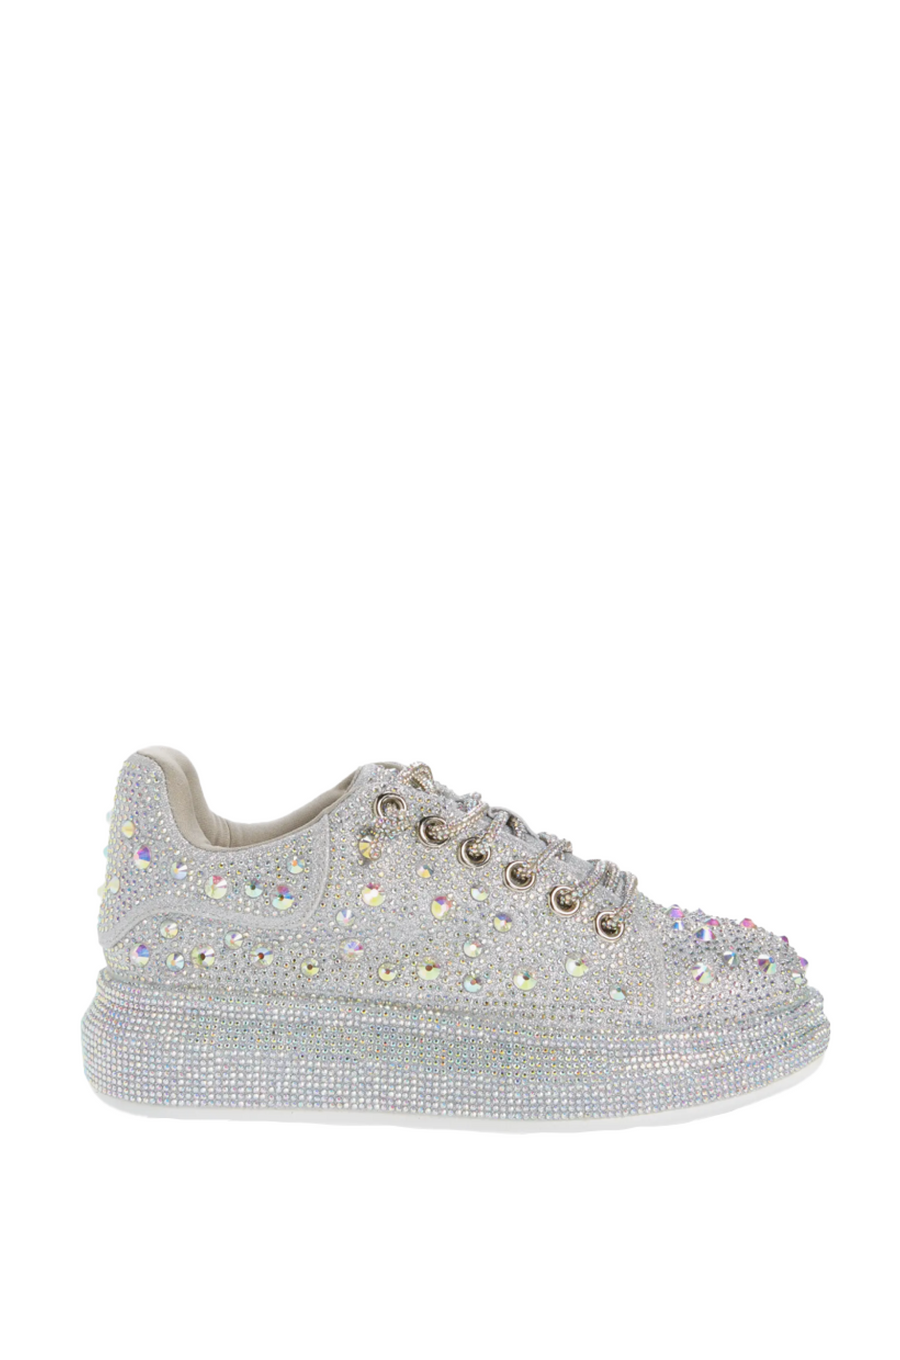 AZURE1-SILVER CRYSTAL LACE UP SNEAKER